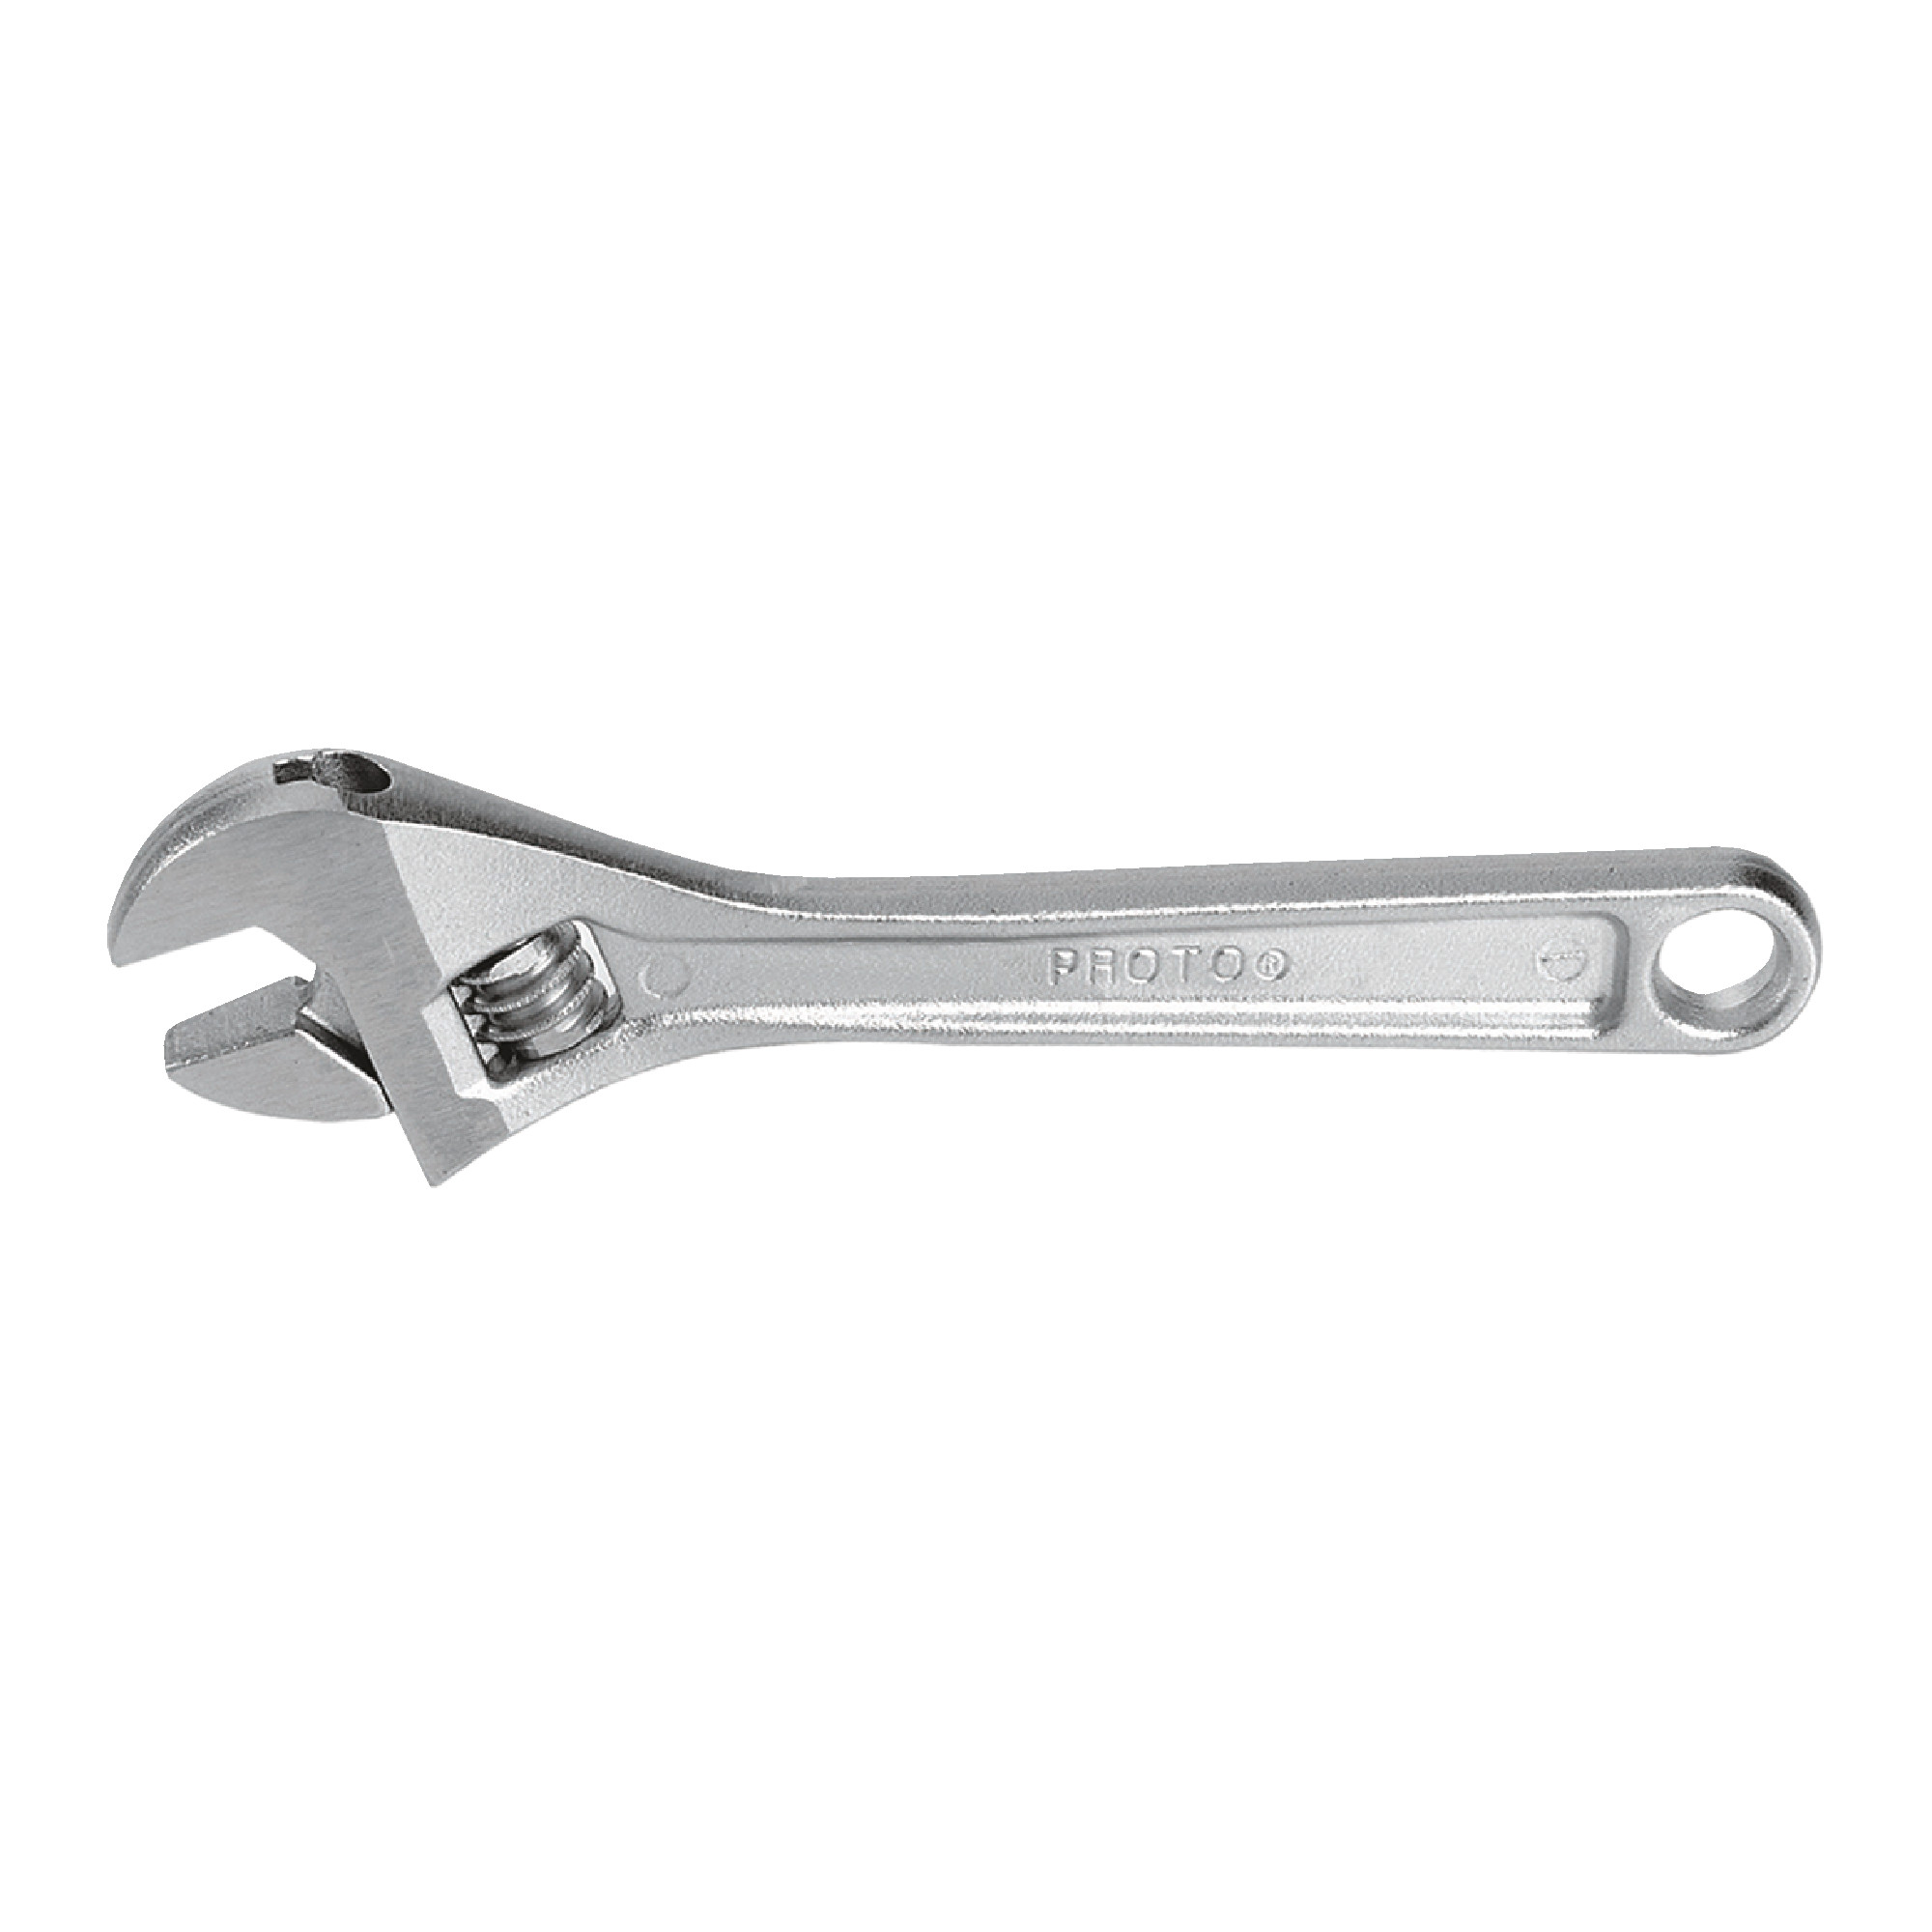 J710 1-5/16" Adjustable Wrench With Satin Chrome Finish